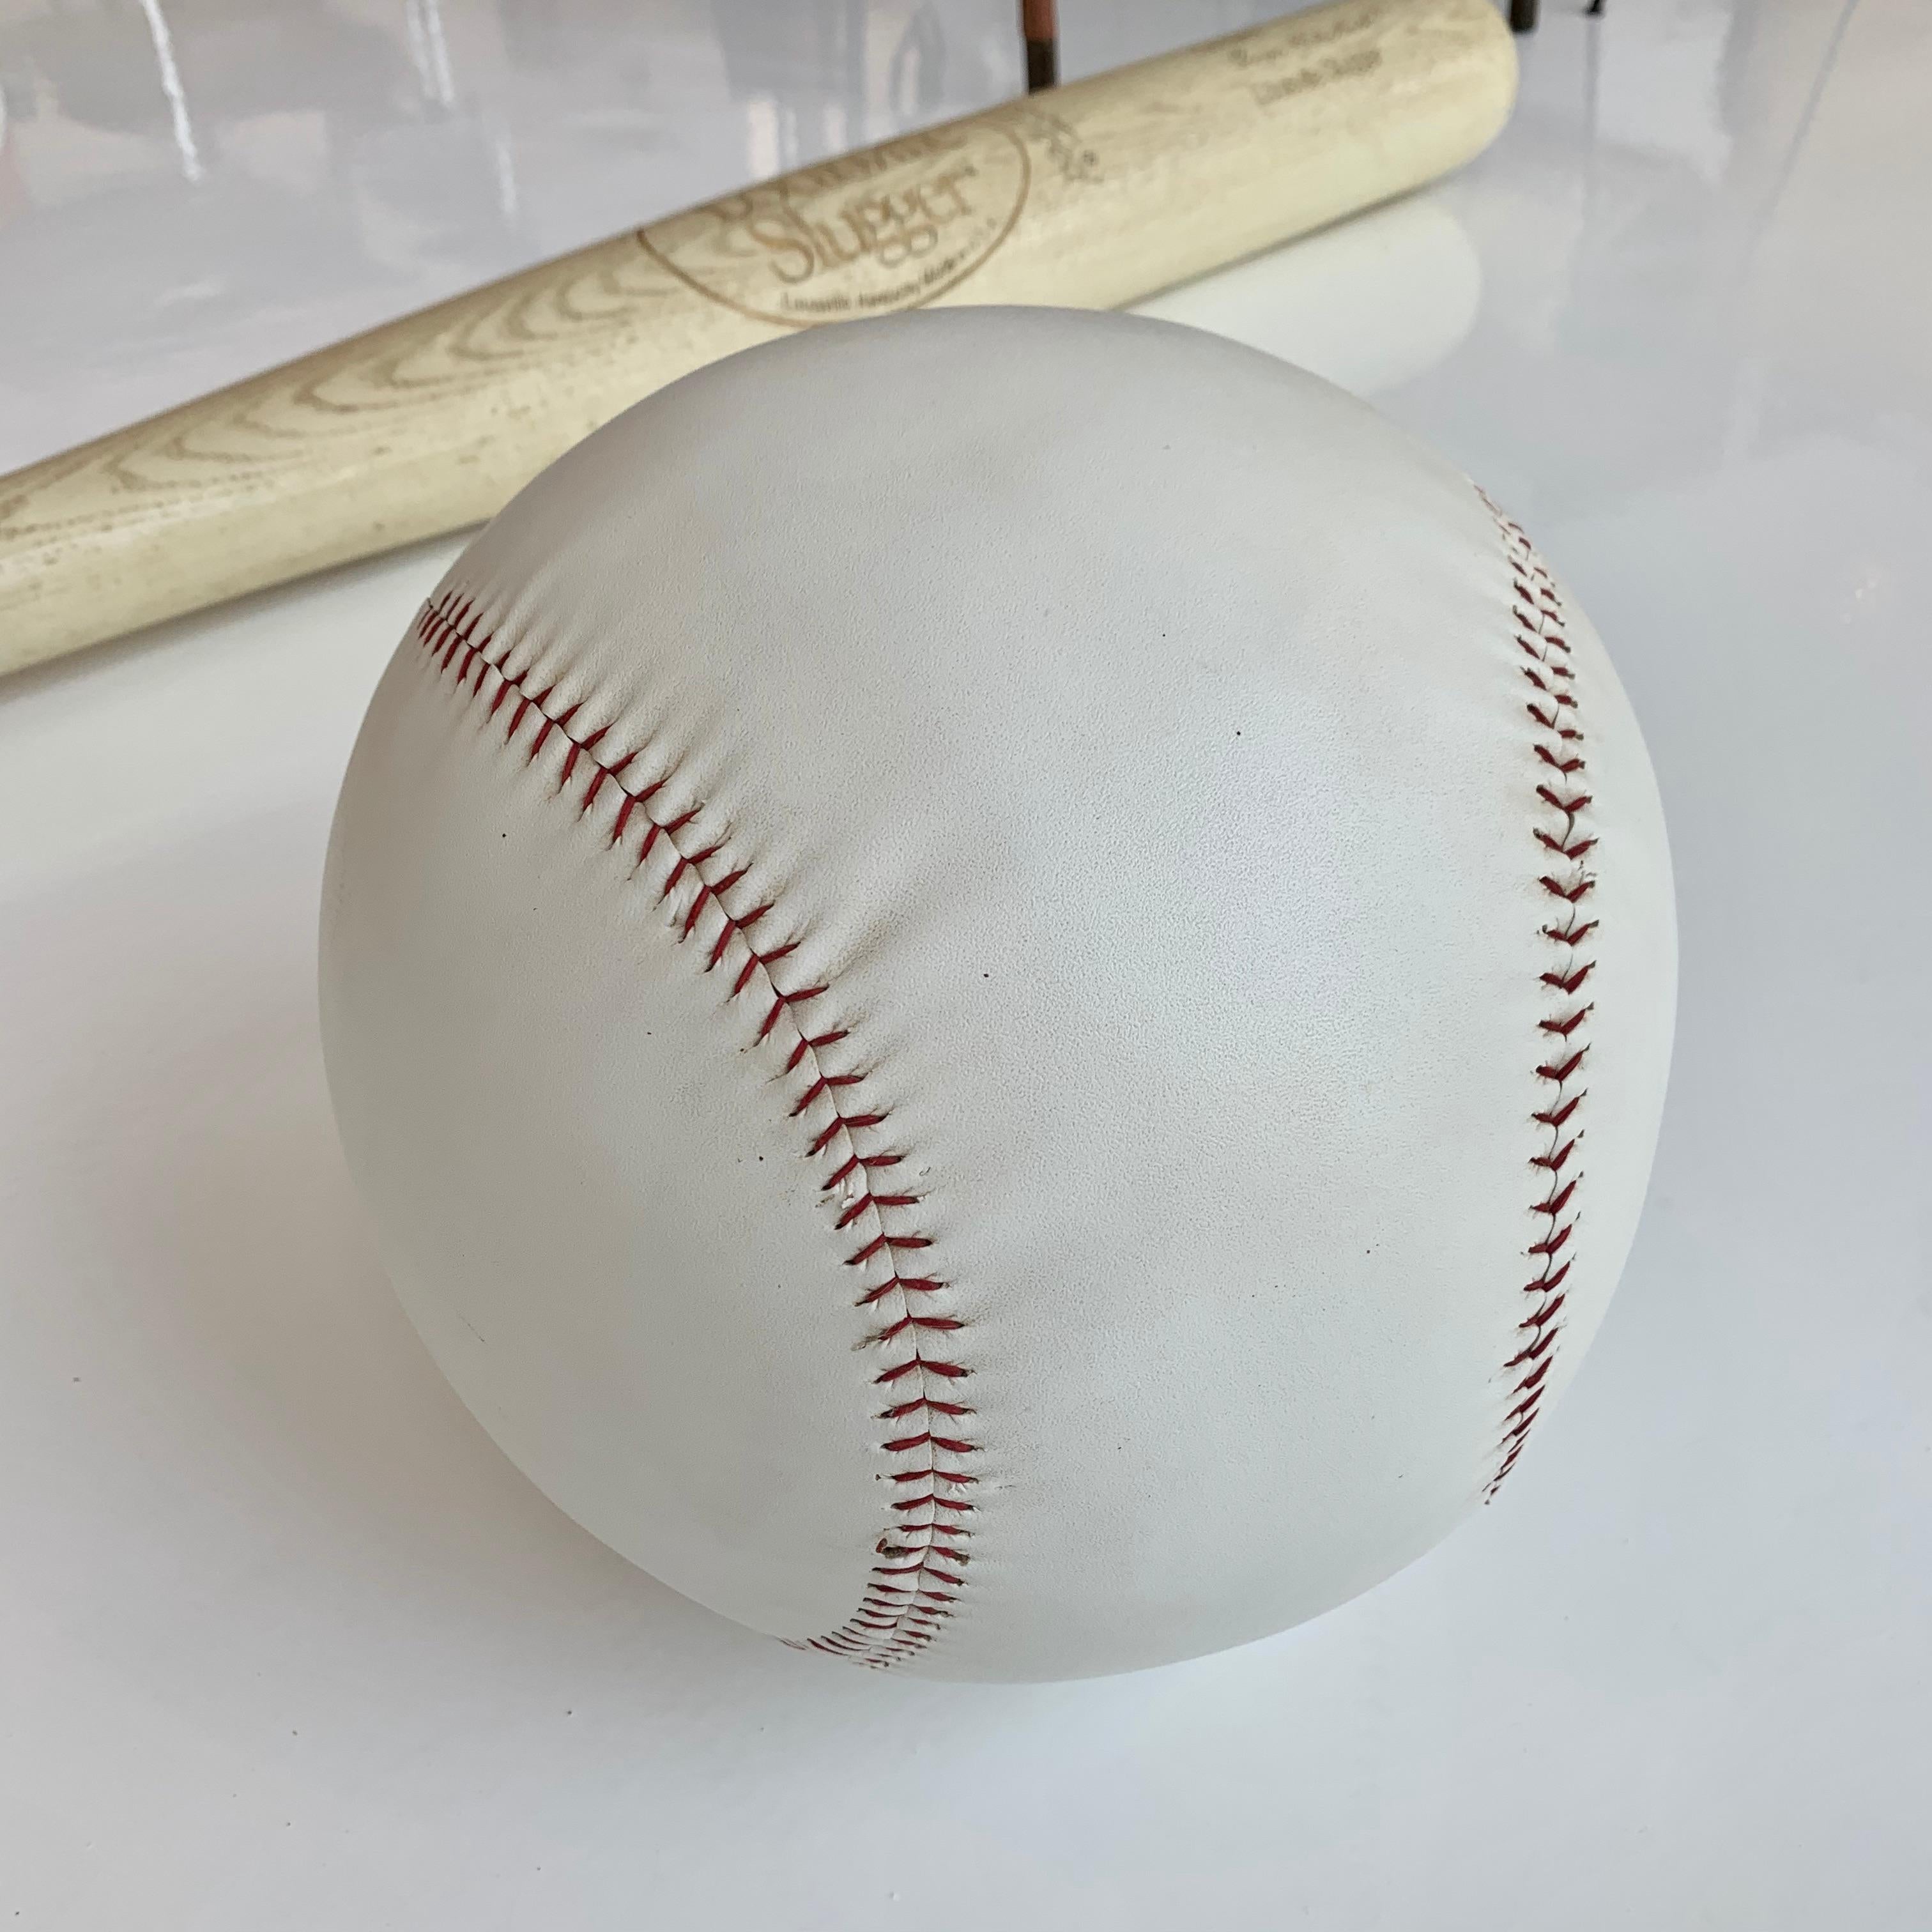 Cool oversized leather baseball. White leather with characteristic red stitching. Measures: 12